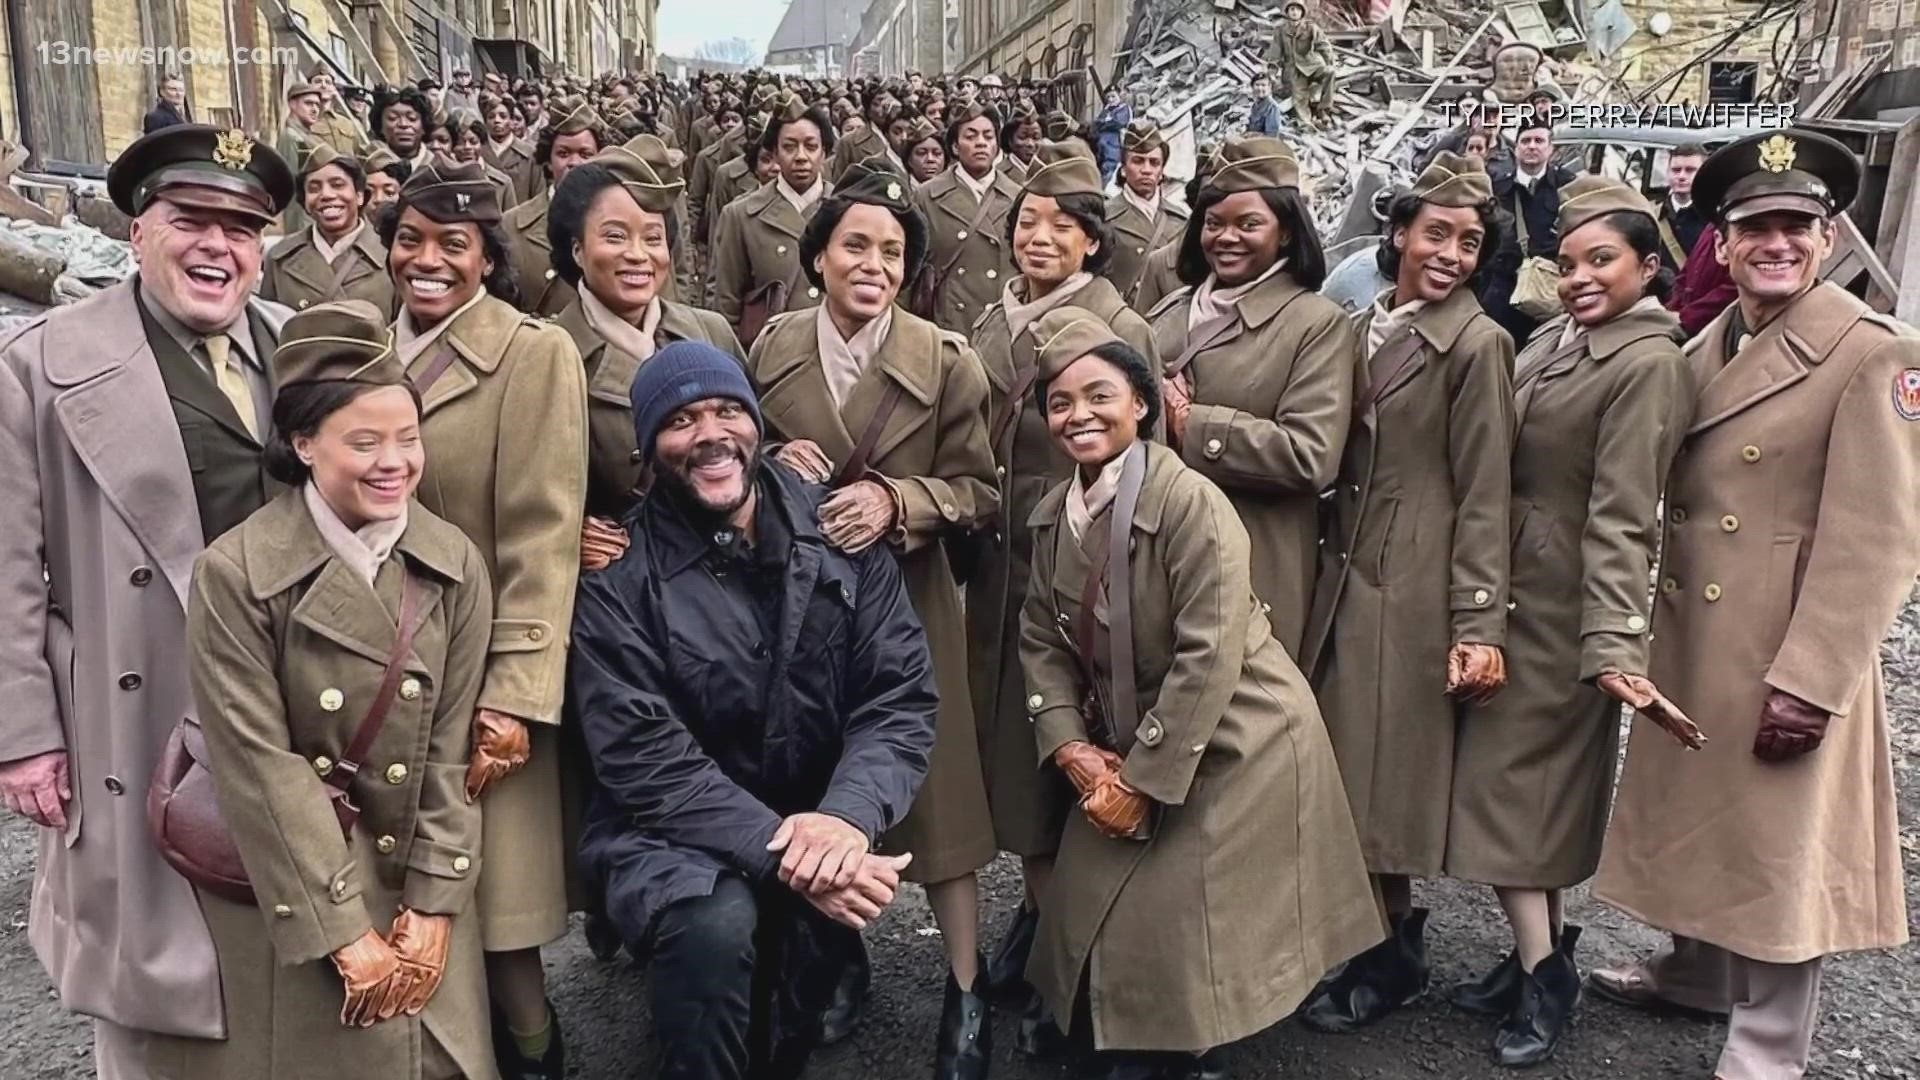 Tyler Perry is shining a movie spotlight on the 6888th Central Postal Directory Battalion's significant impact on World War II after years of hardly any recognition.